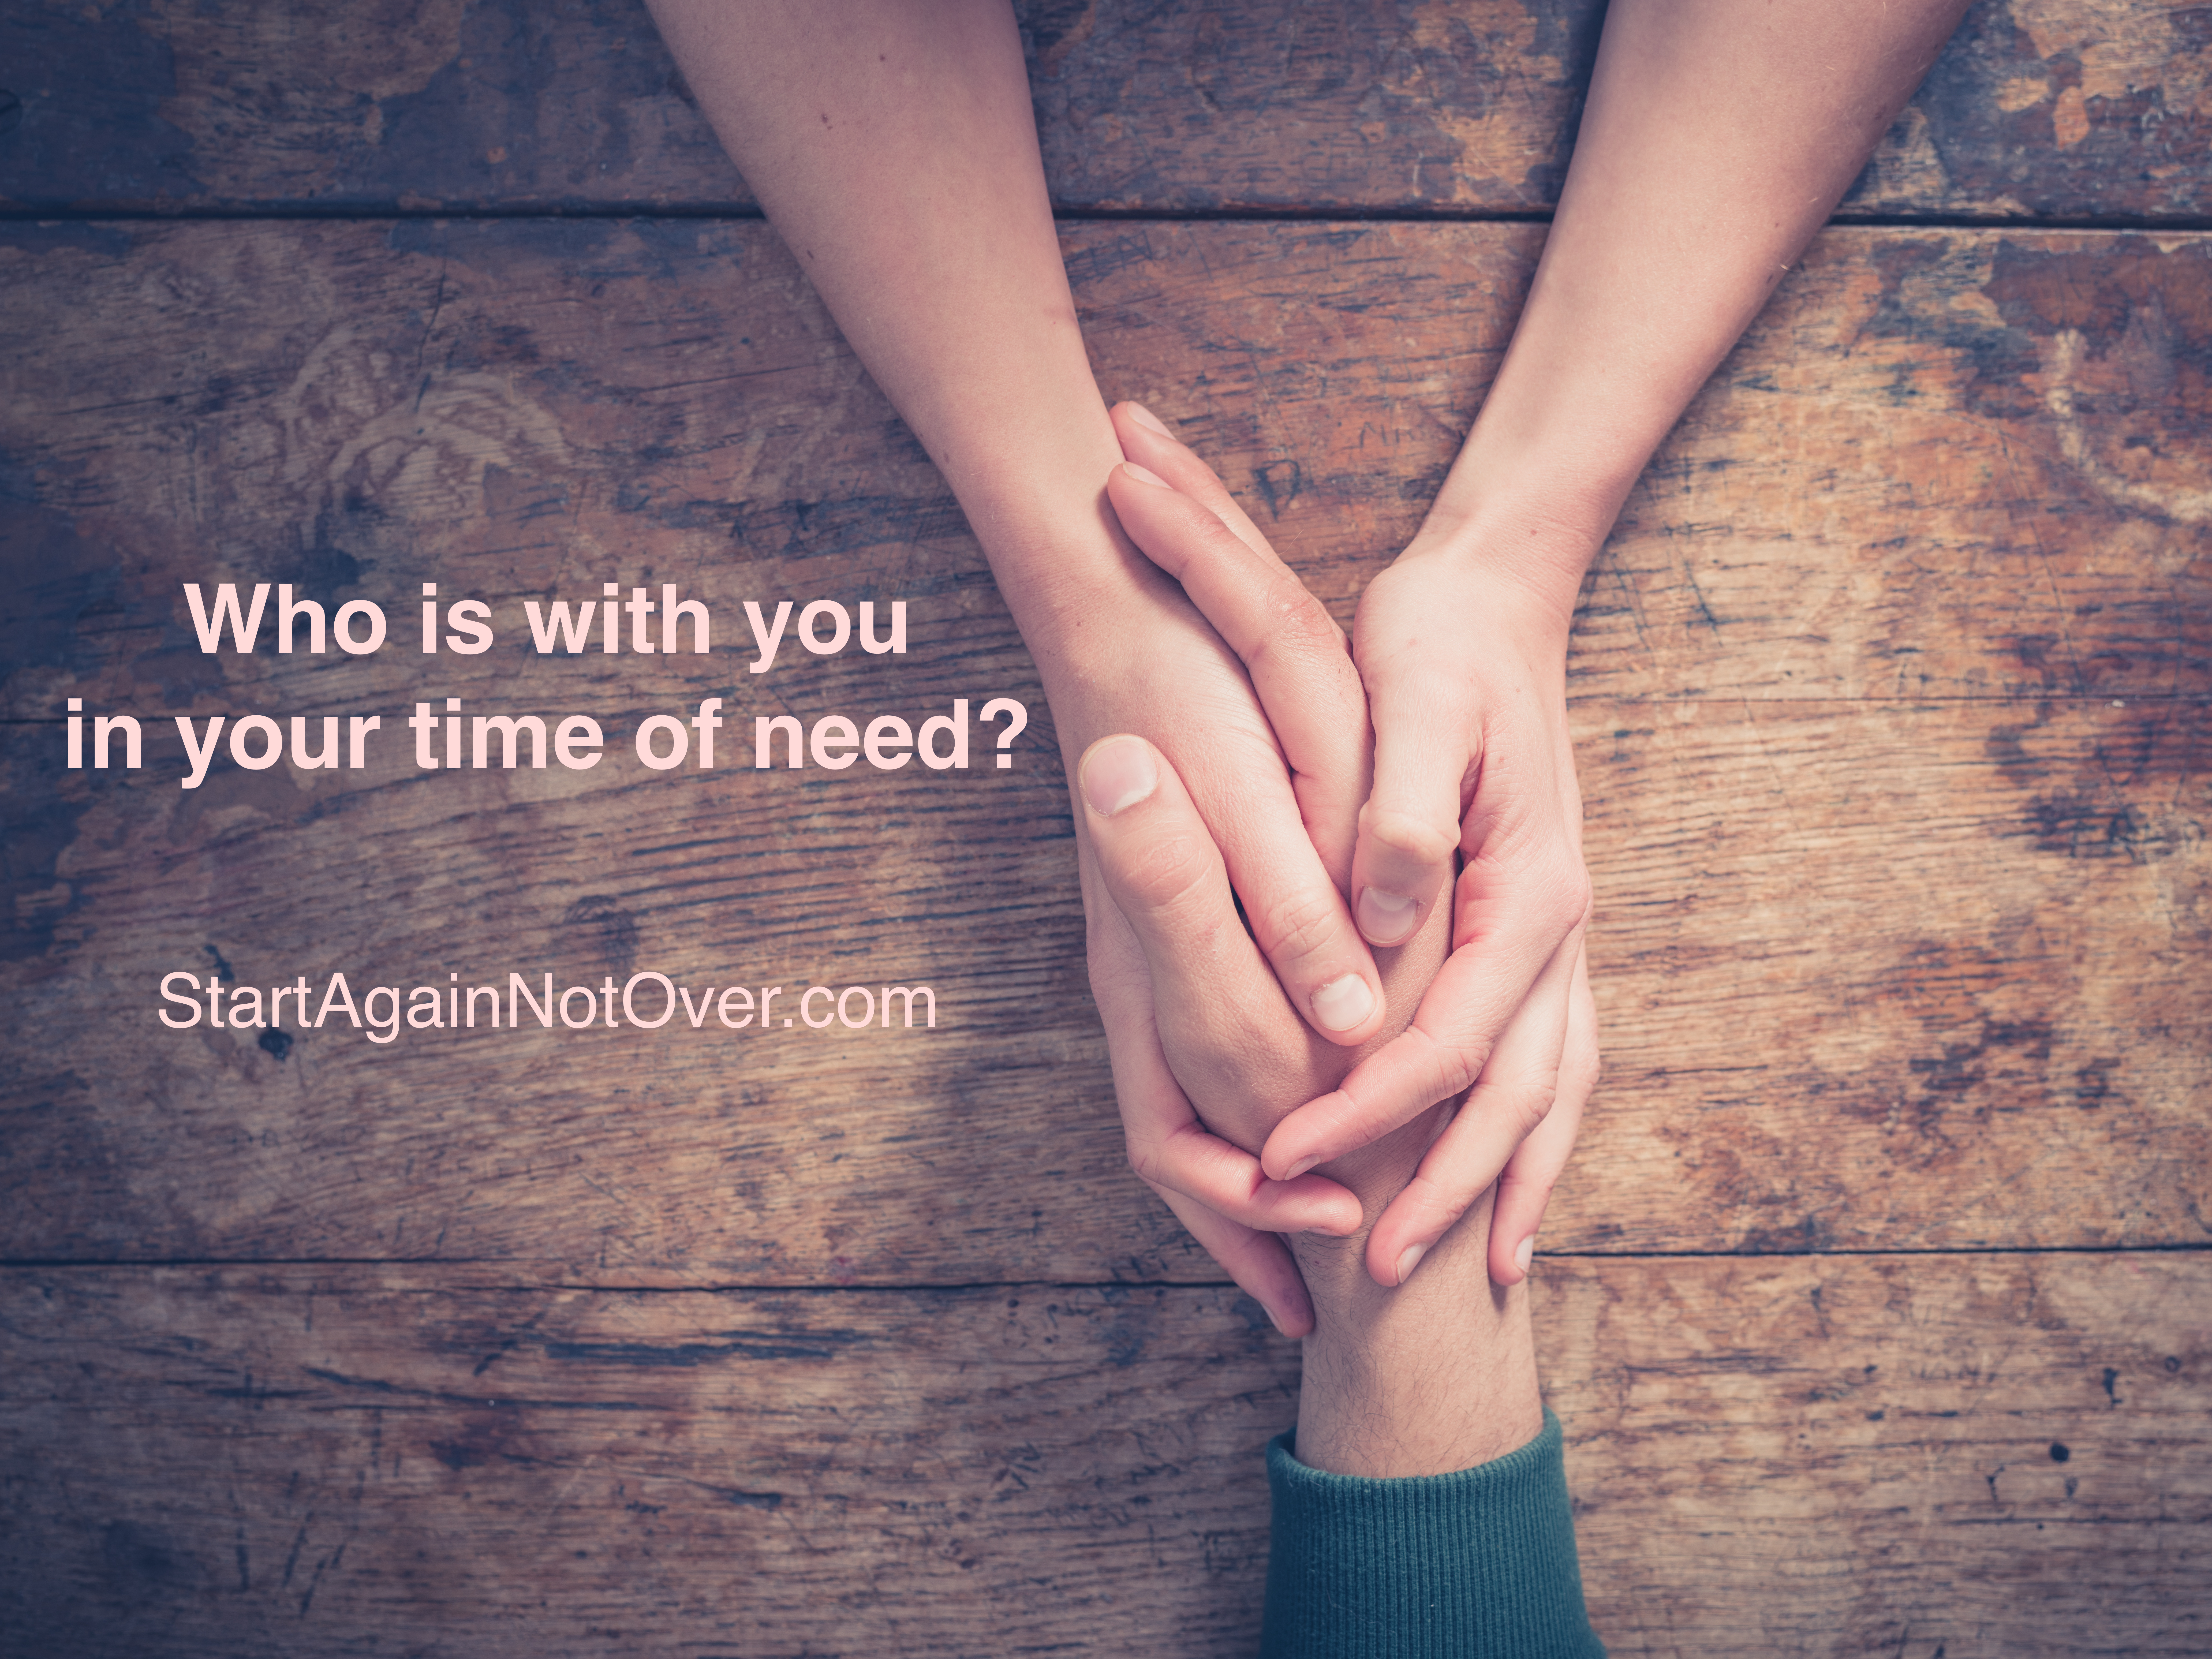 Who Is With You In Your Time of Need?